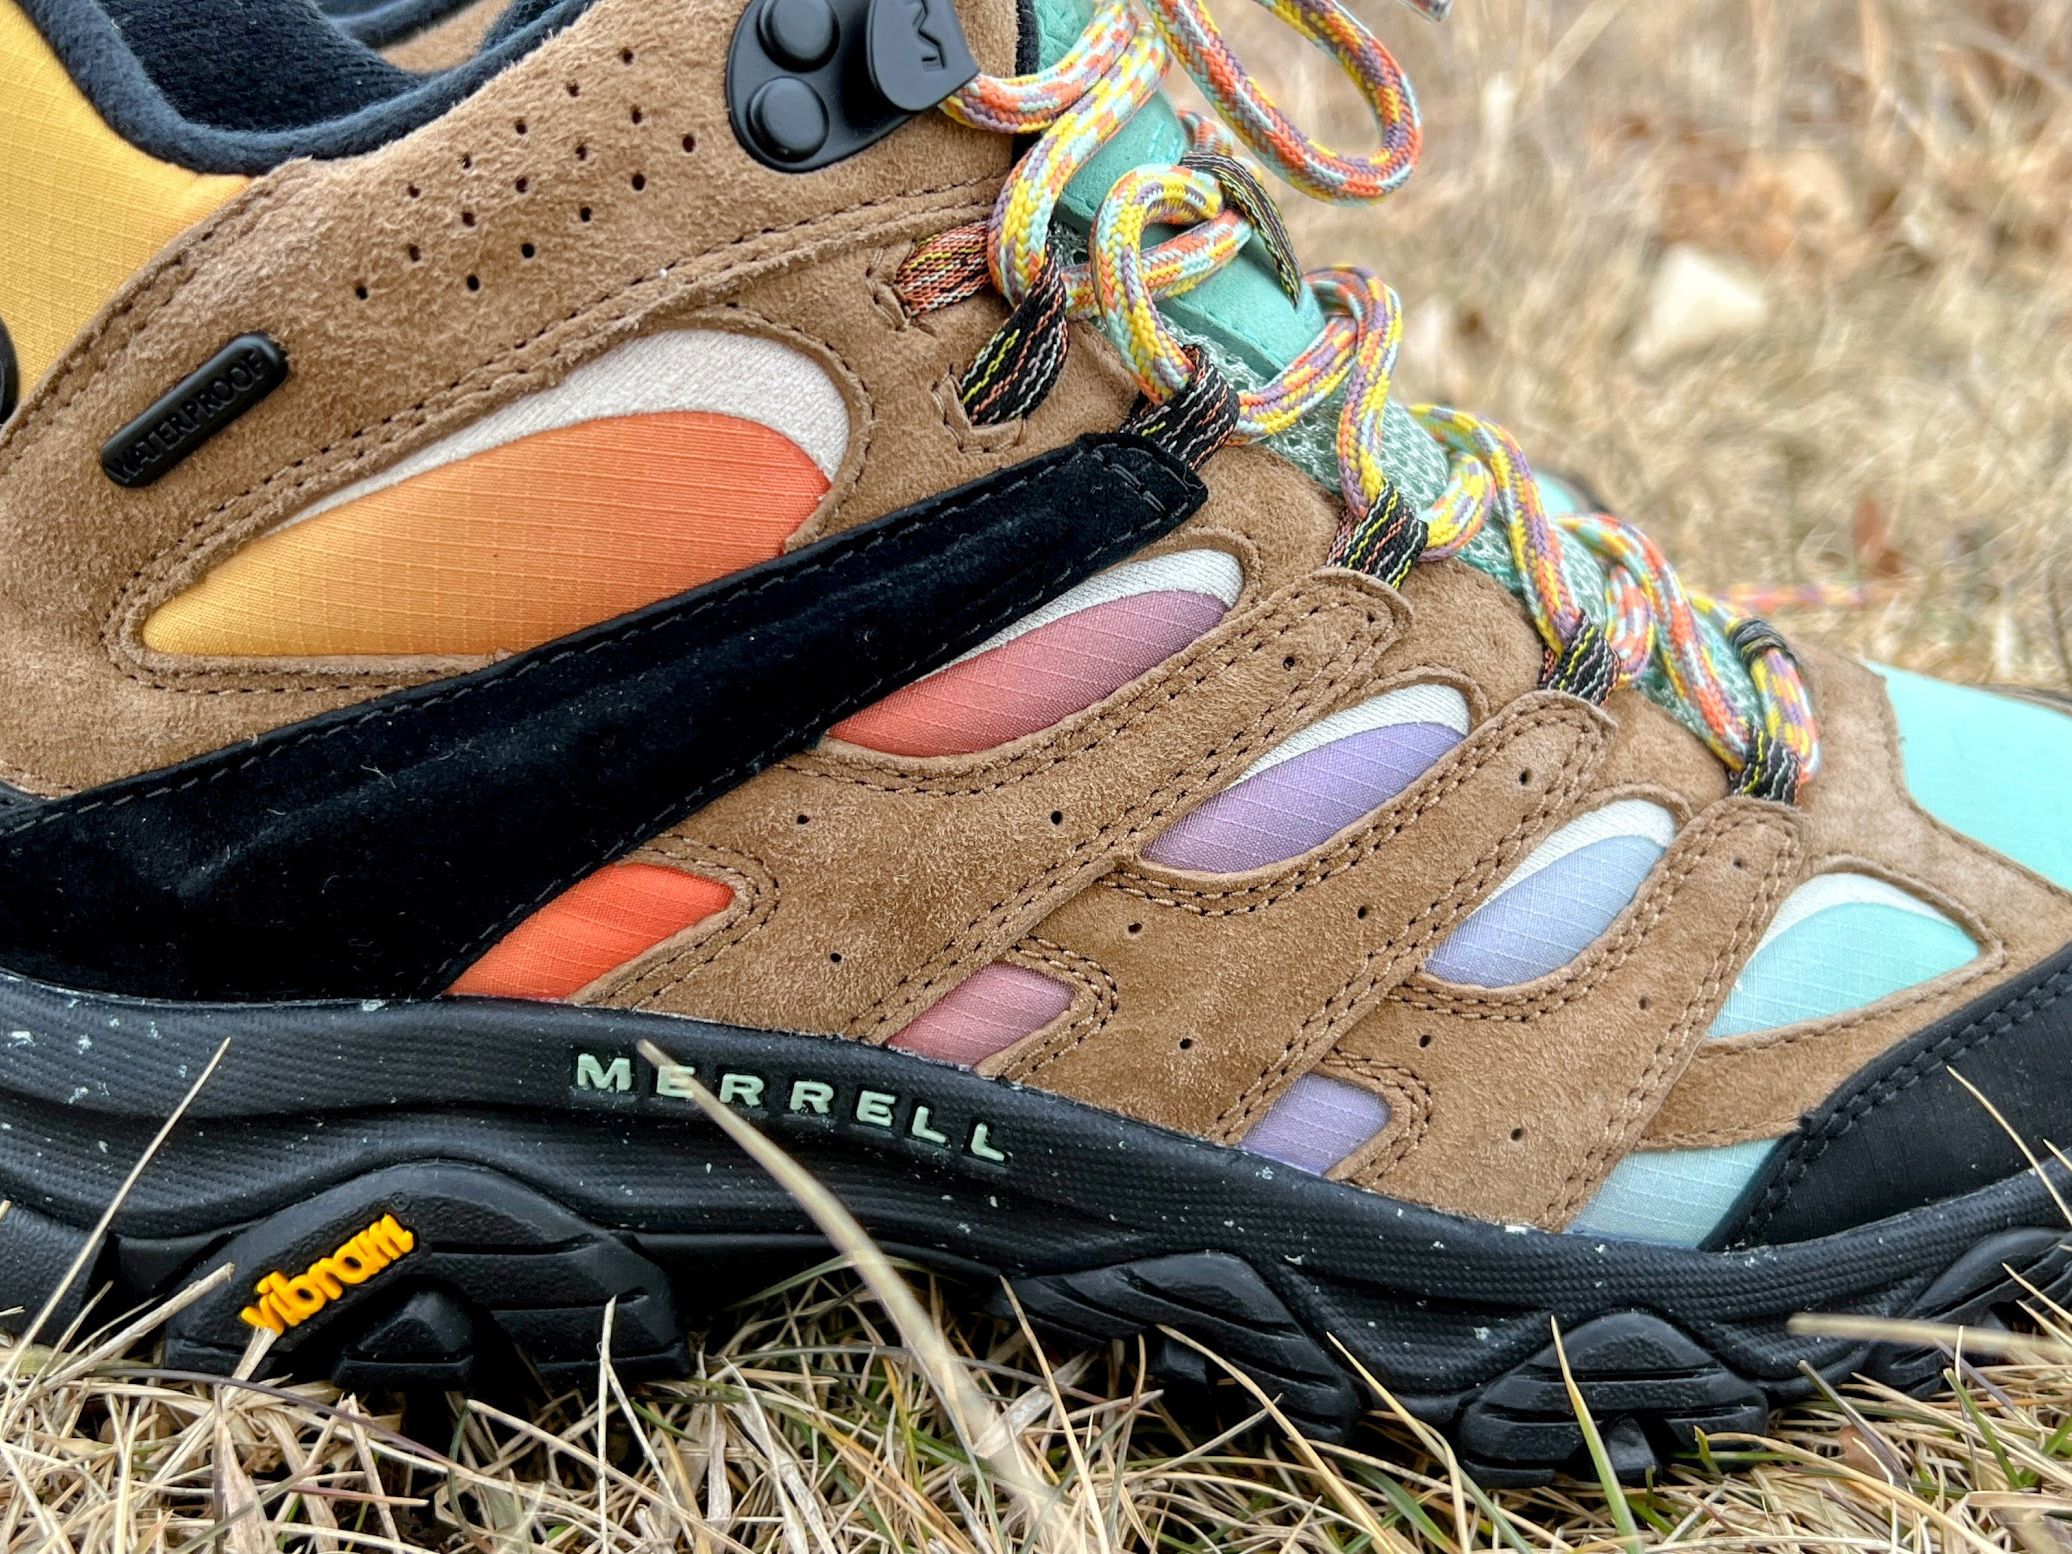 Merrell and Unlikely Hikers collab on the new Moab | CNN Underscored